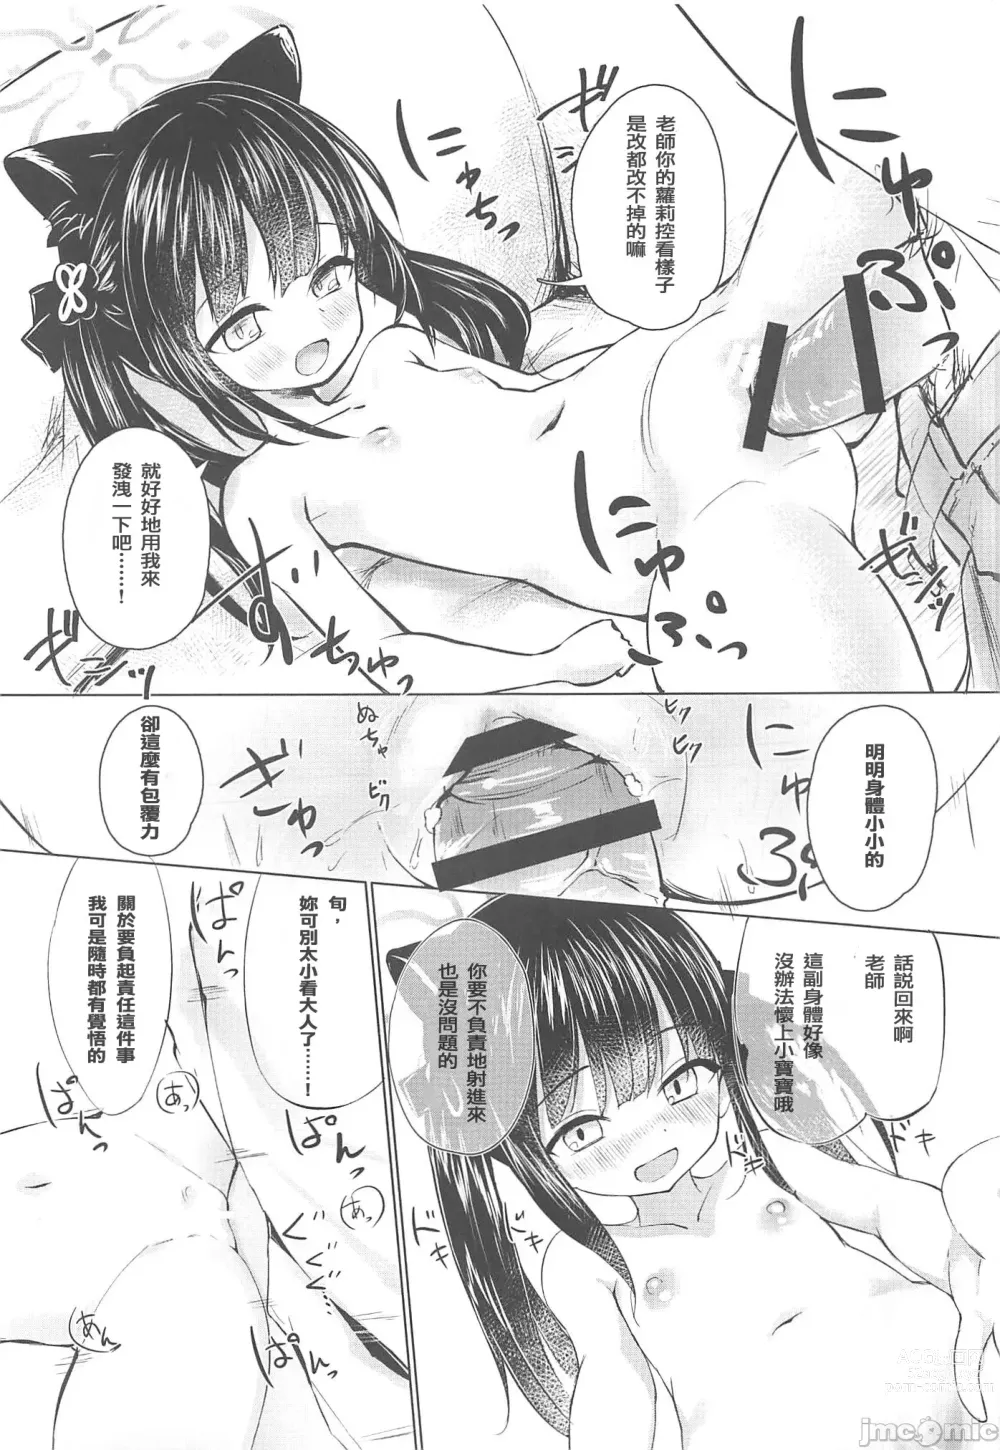 Page 14 of doujinshi Youjo Archive